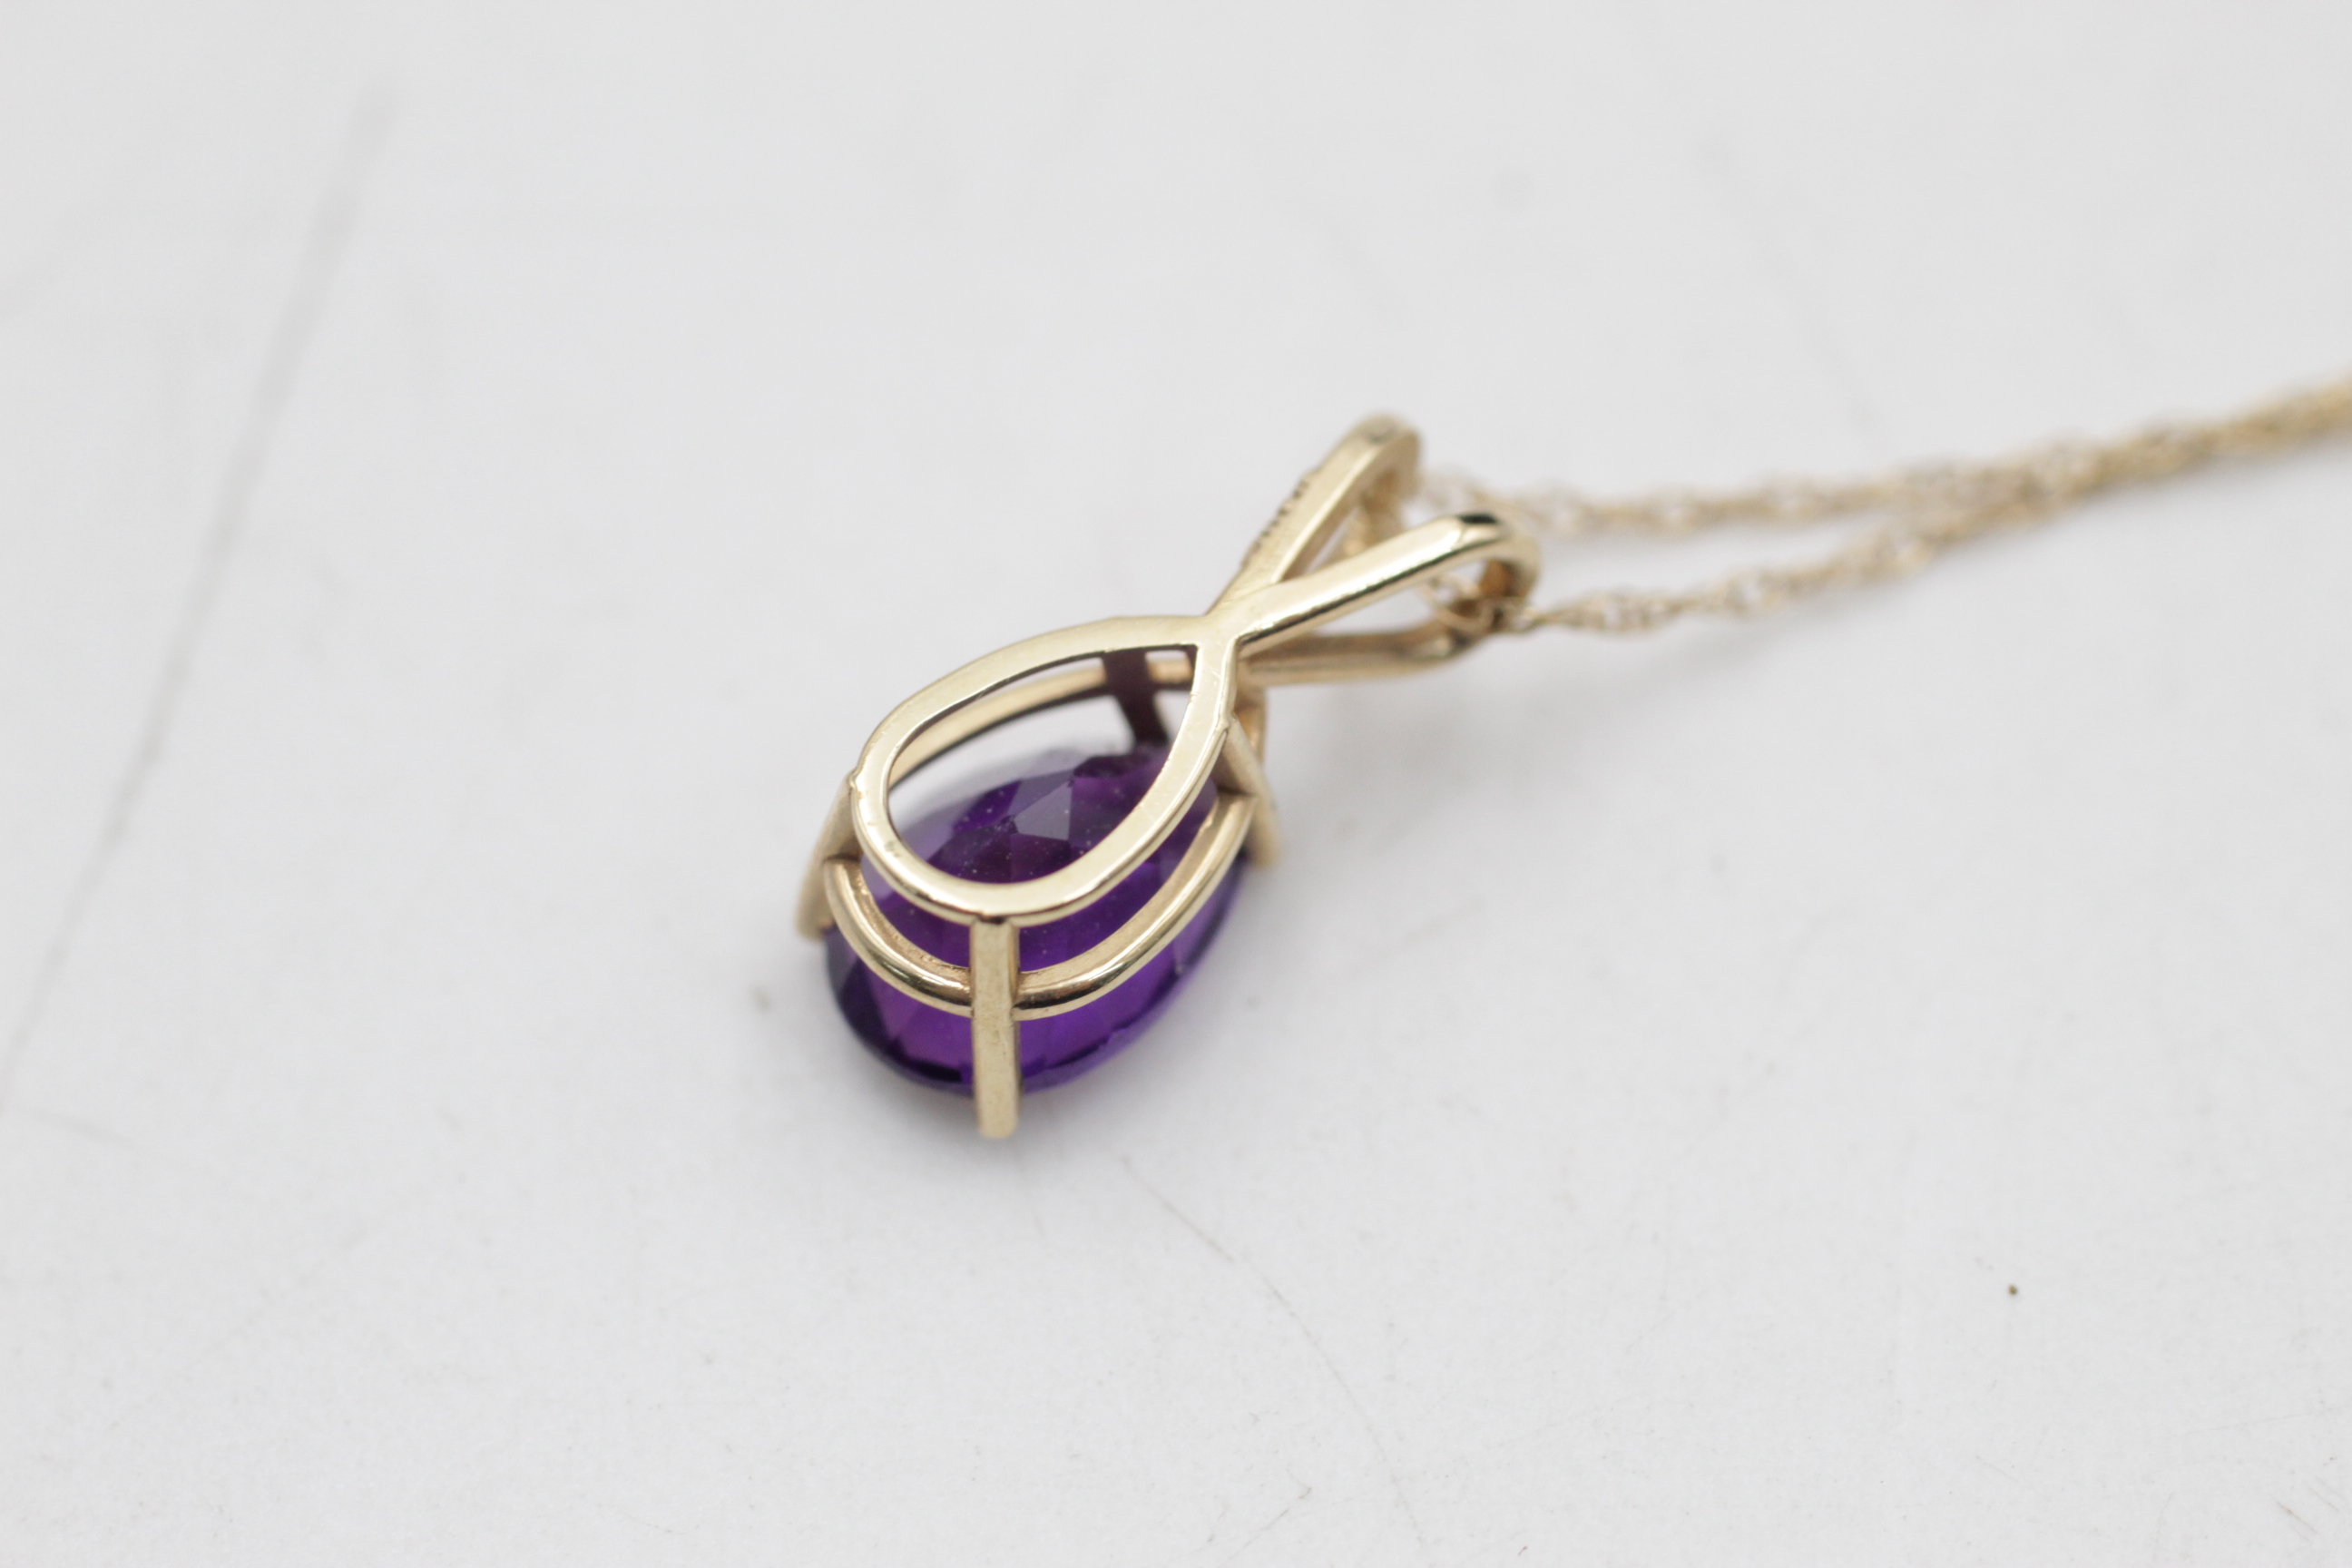 14ct gold amethyst solitaire pendant necklace (1.6g) - Image 4 of 6